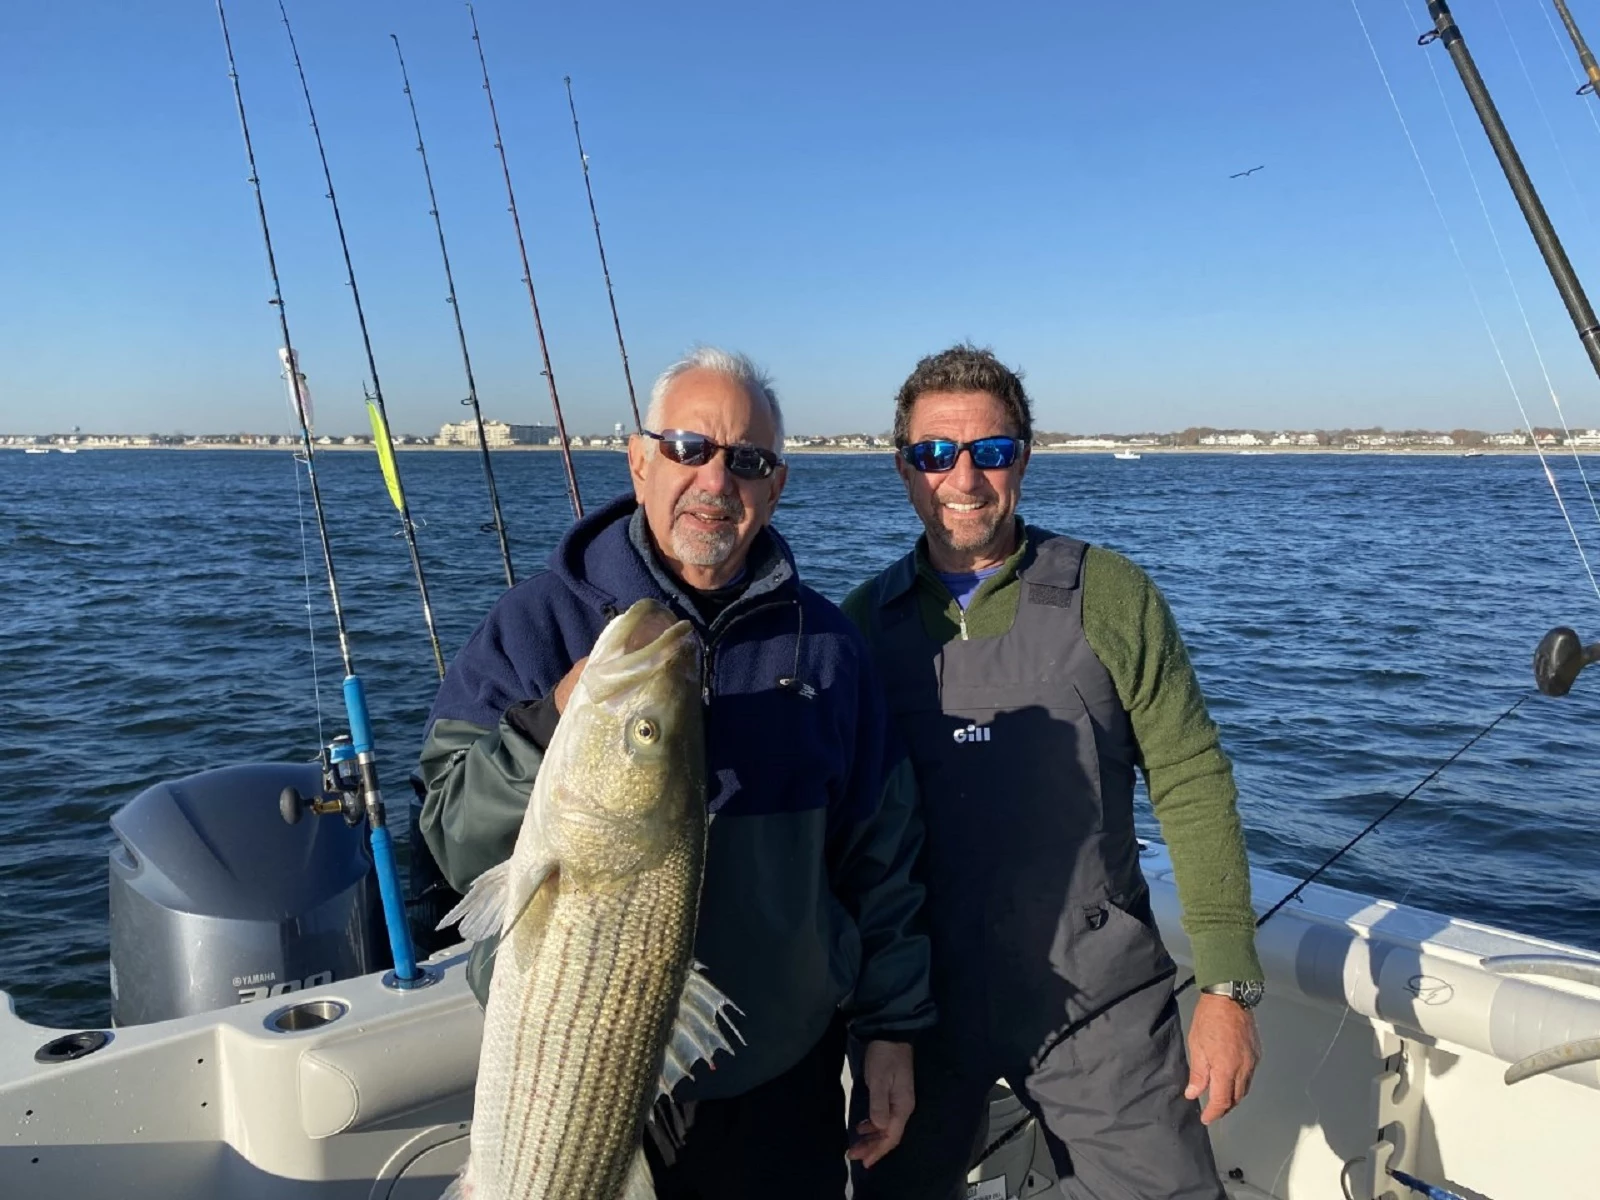 Striper fishing is red hot right now in NJ